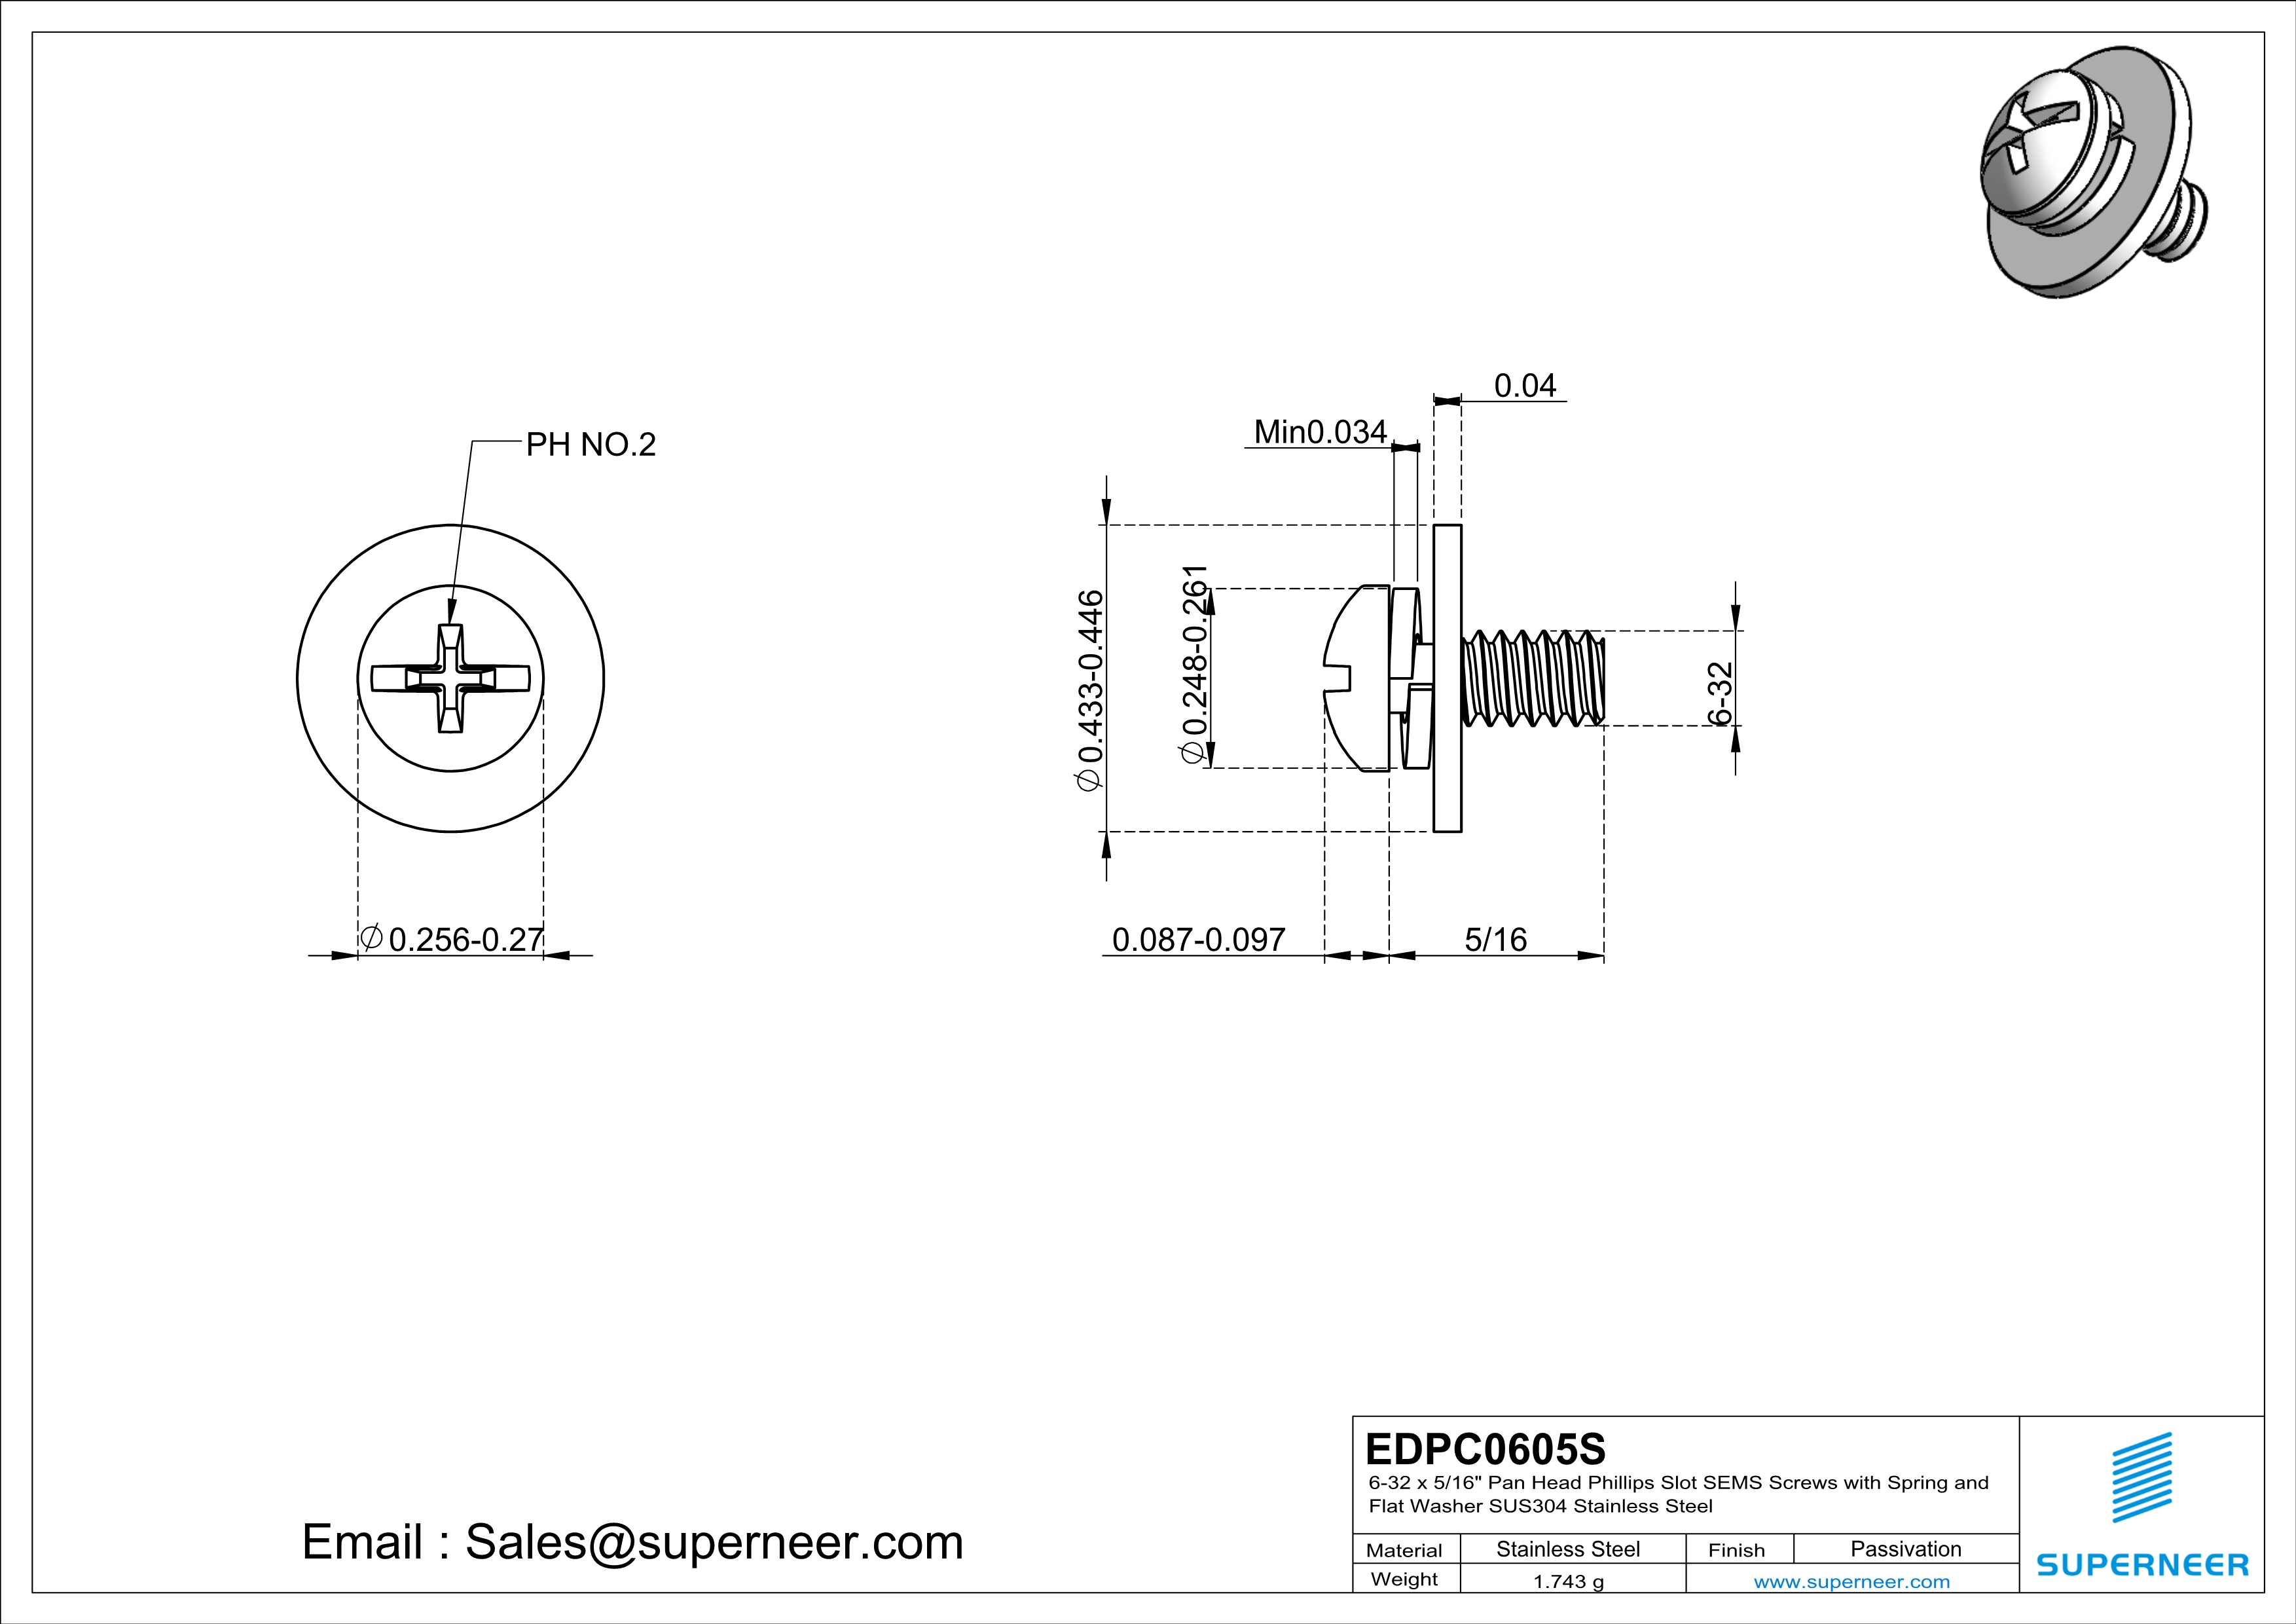 6-32 x 5/16" Pan Head Phillips Slot SEMS Screws with Spring and Flat Washer SUS304 Stainless Steel Inox